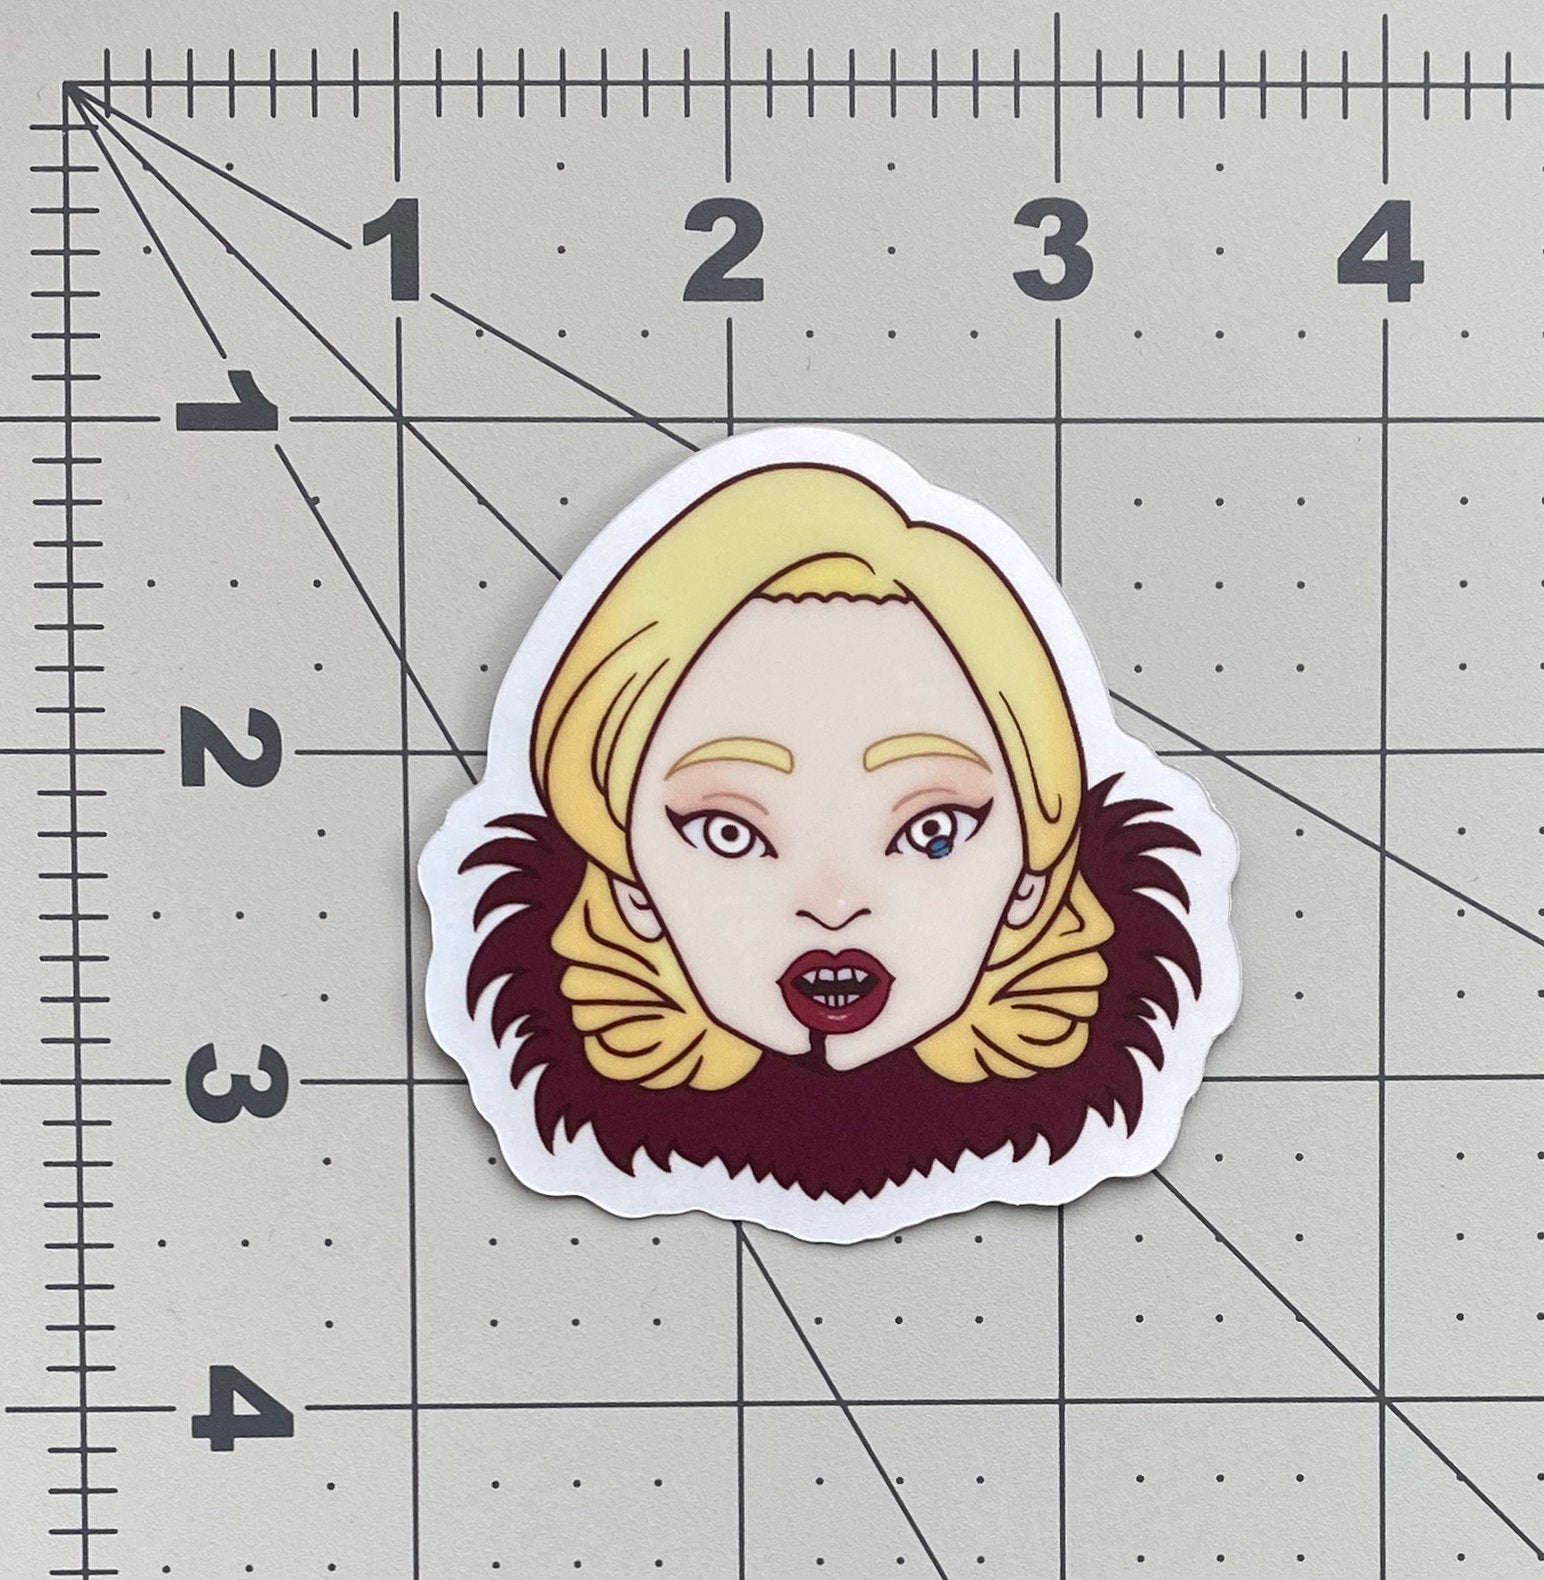 An illustrated sticker of Lady Gaga from American Horror Story on a ruler to show its dimensions